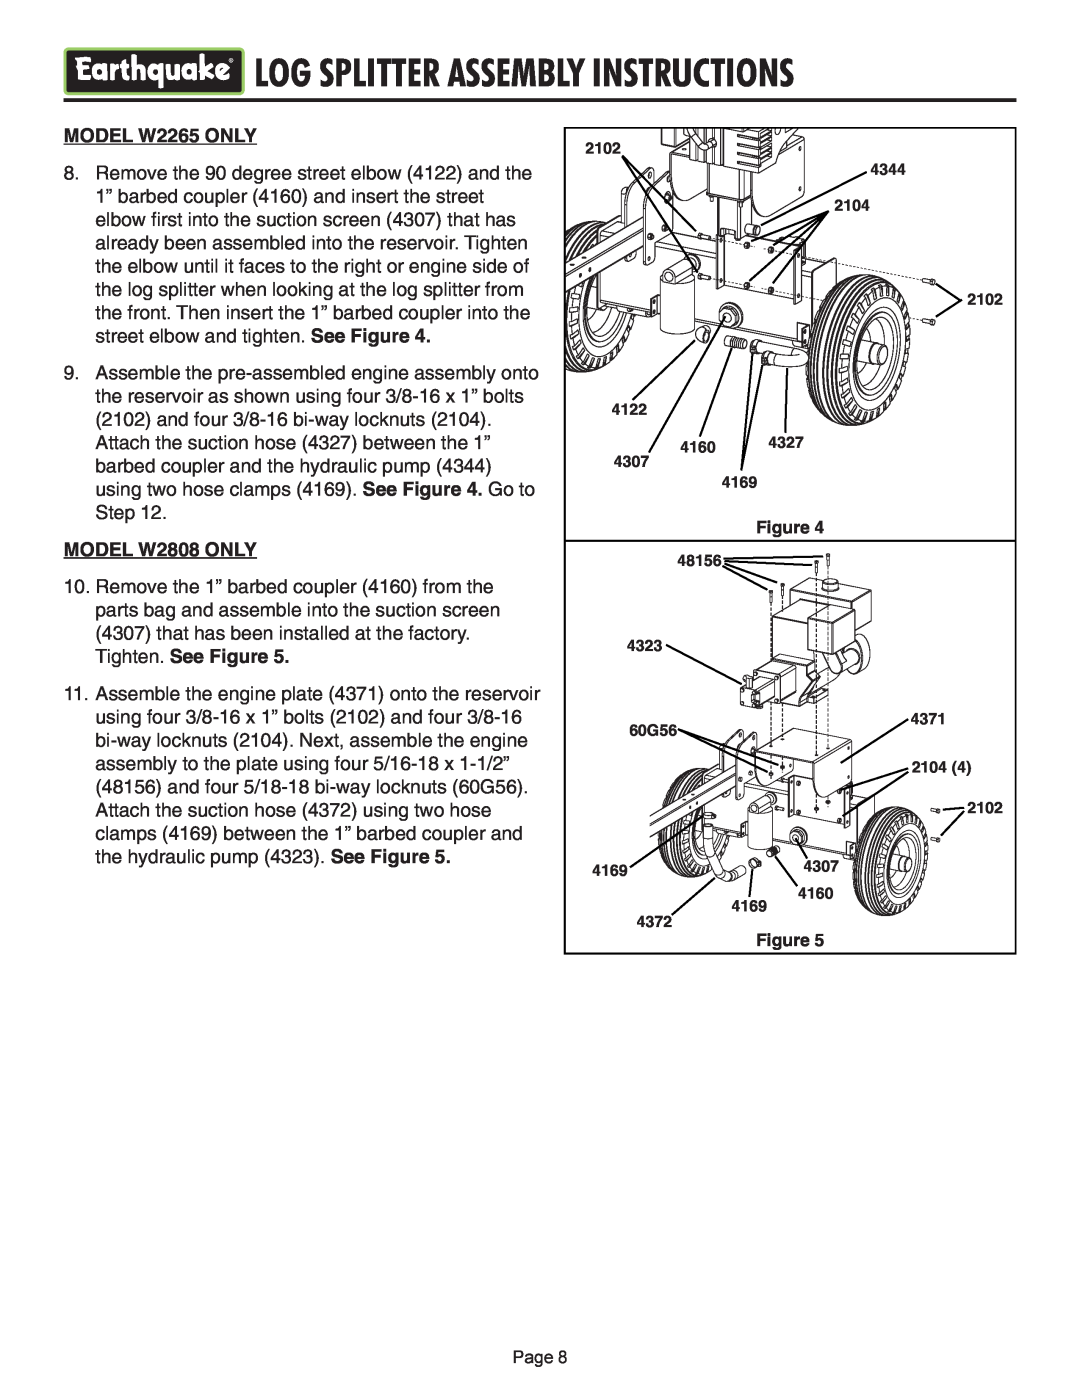 EarthQuake Log Splitter Assembly Instructions, MODEL W2265 ONLY, MODEL W2808 ONLY, Tighten. See Figure 